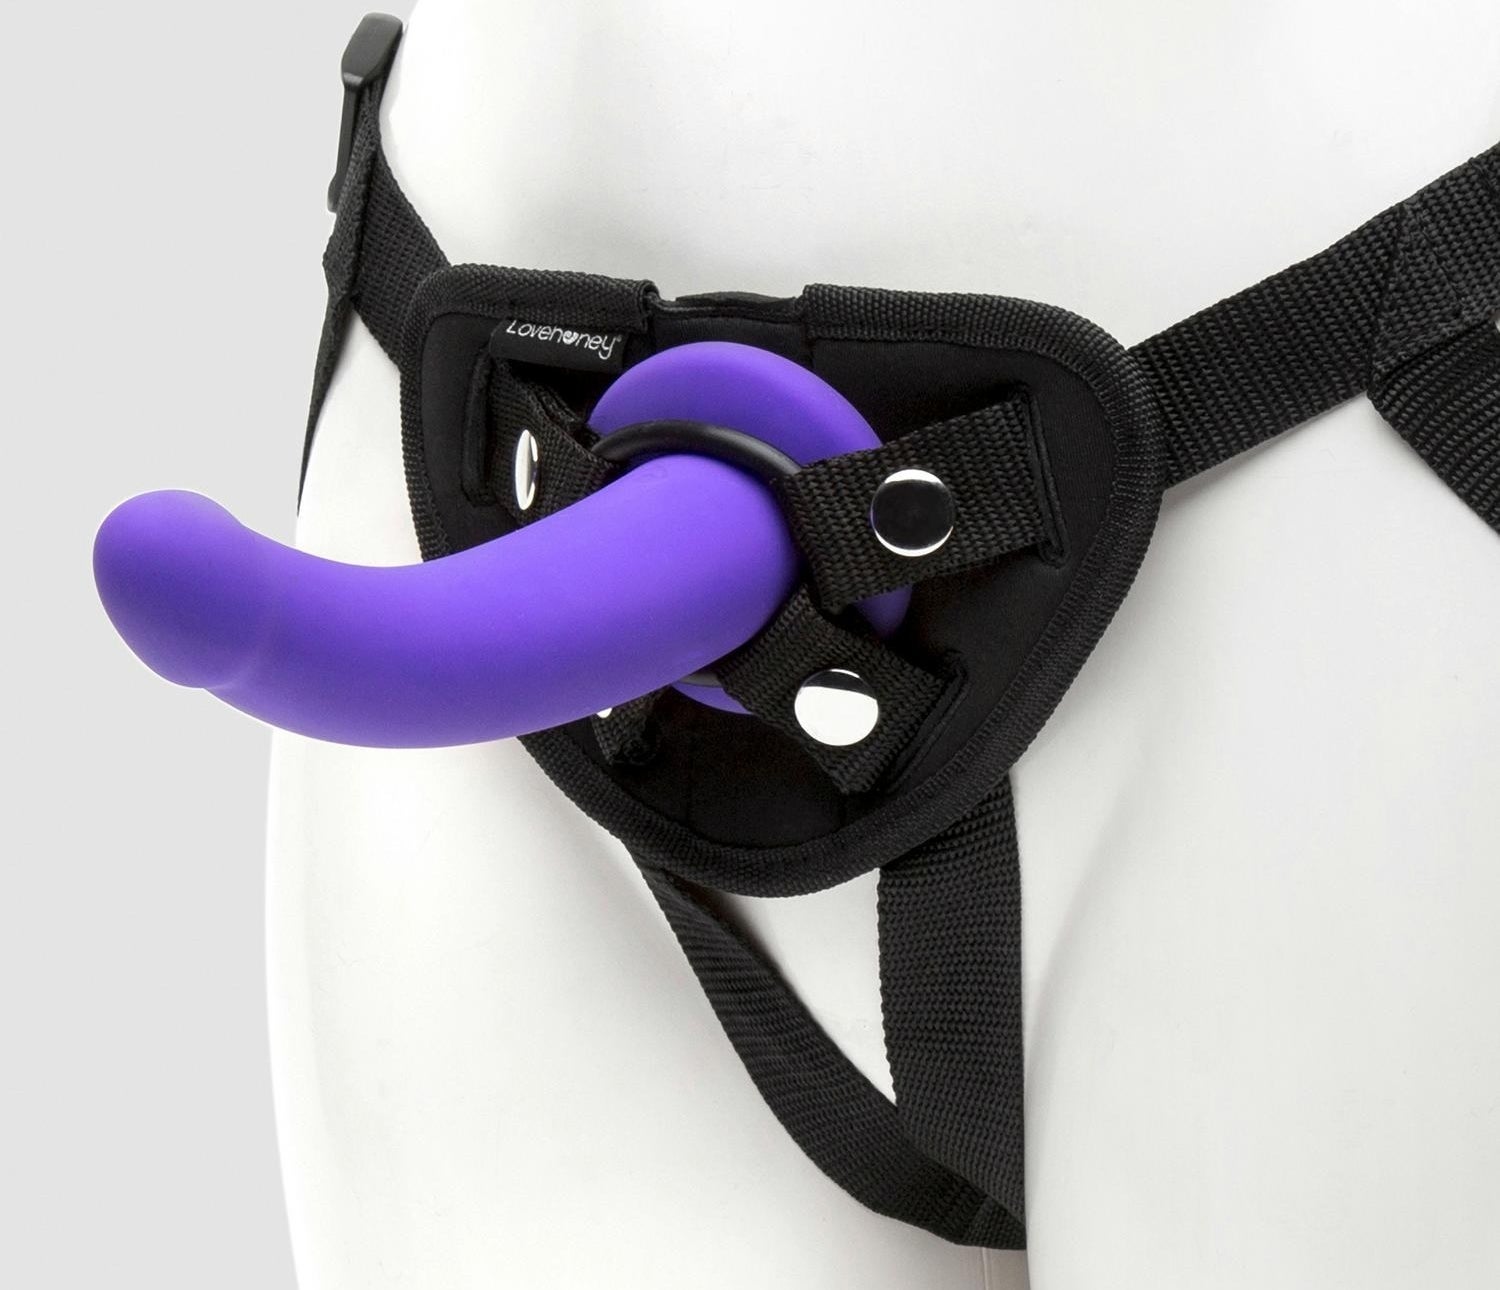 The strap-on worn by a mannequin